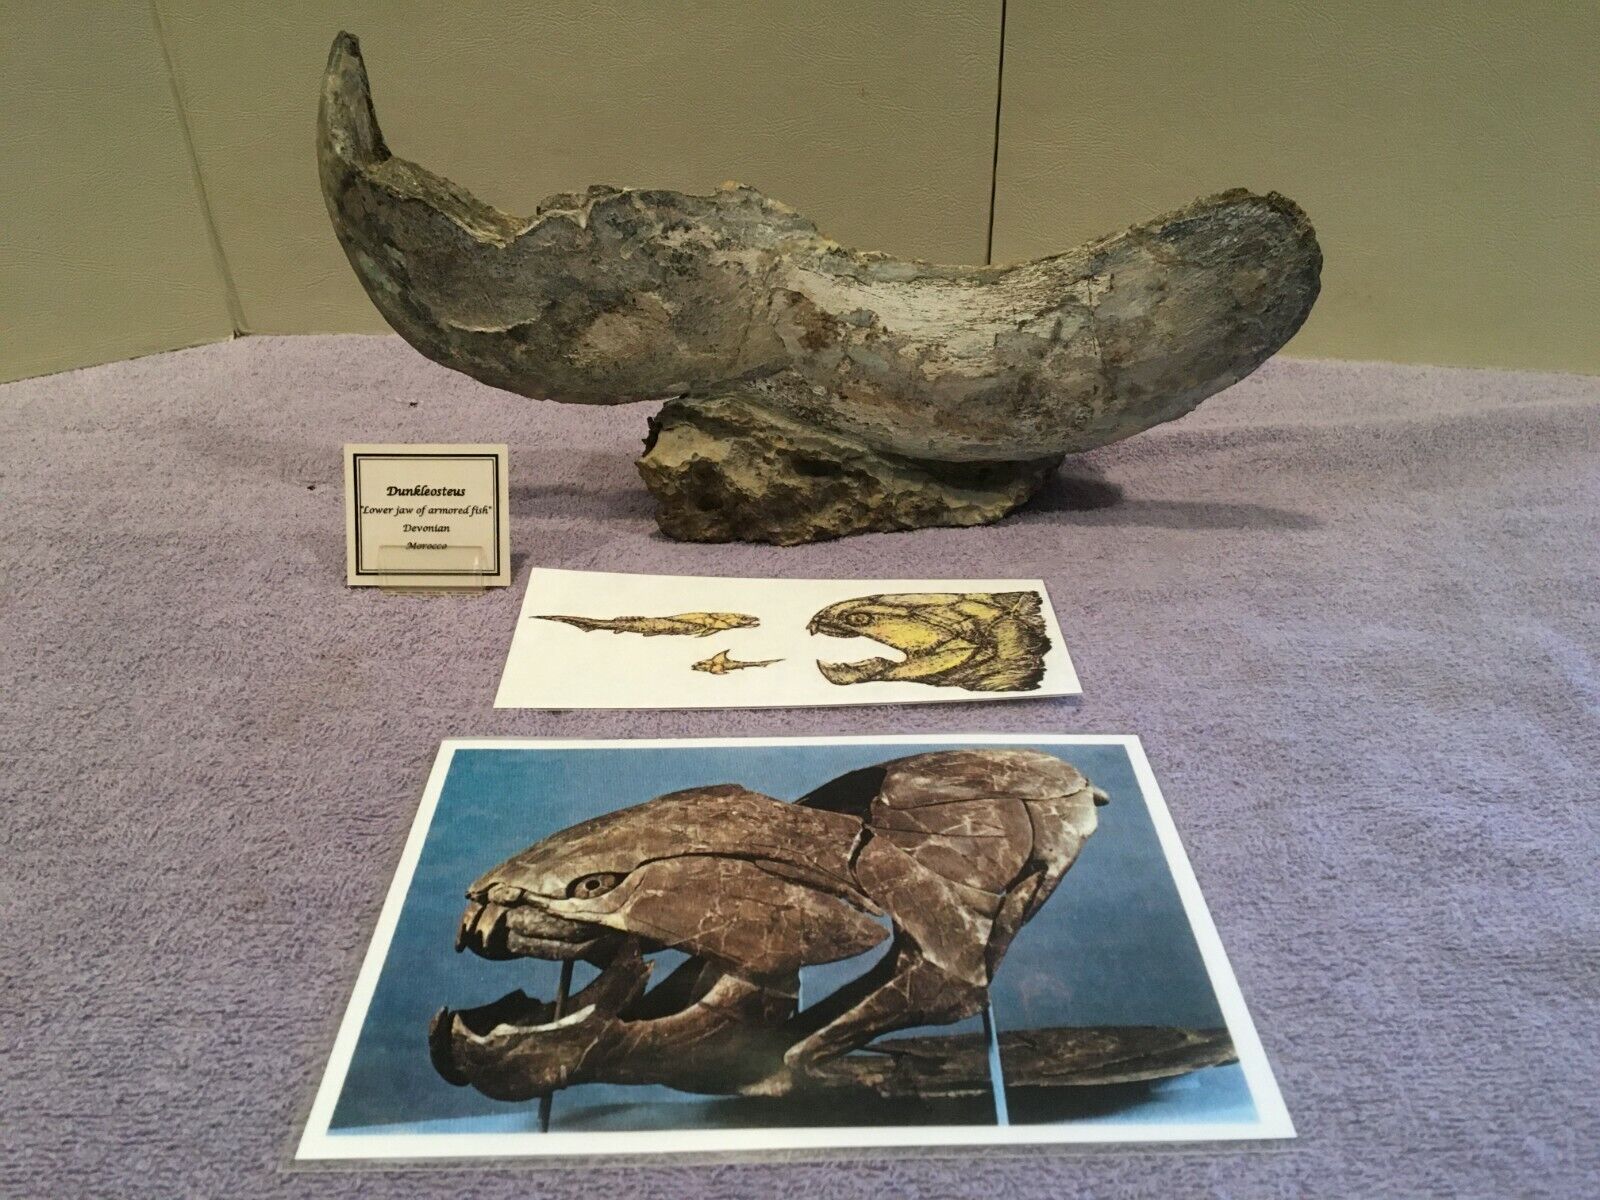 DUNKLEOSTEUS-COMPLETE LOWER JAW-DEVONIAN-ARMORED FISH-MUSEUM GRADE FOSSIL